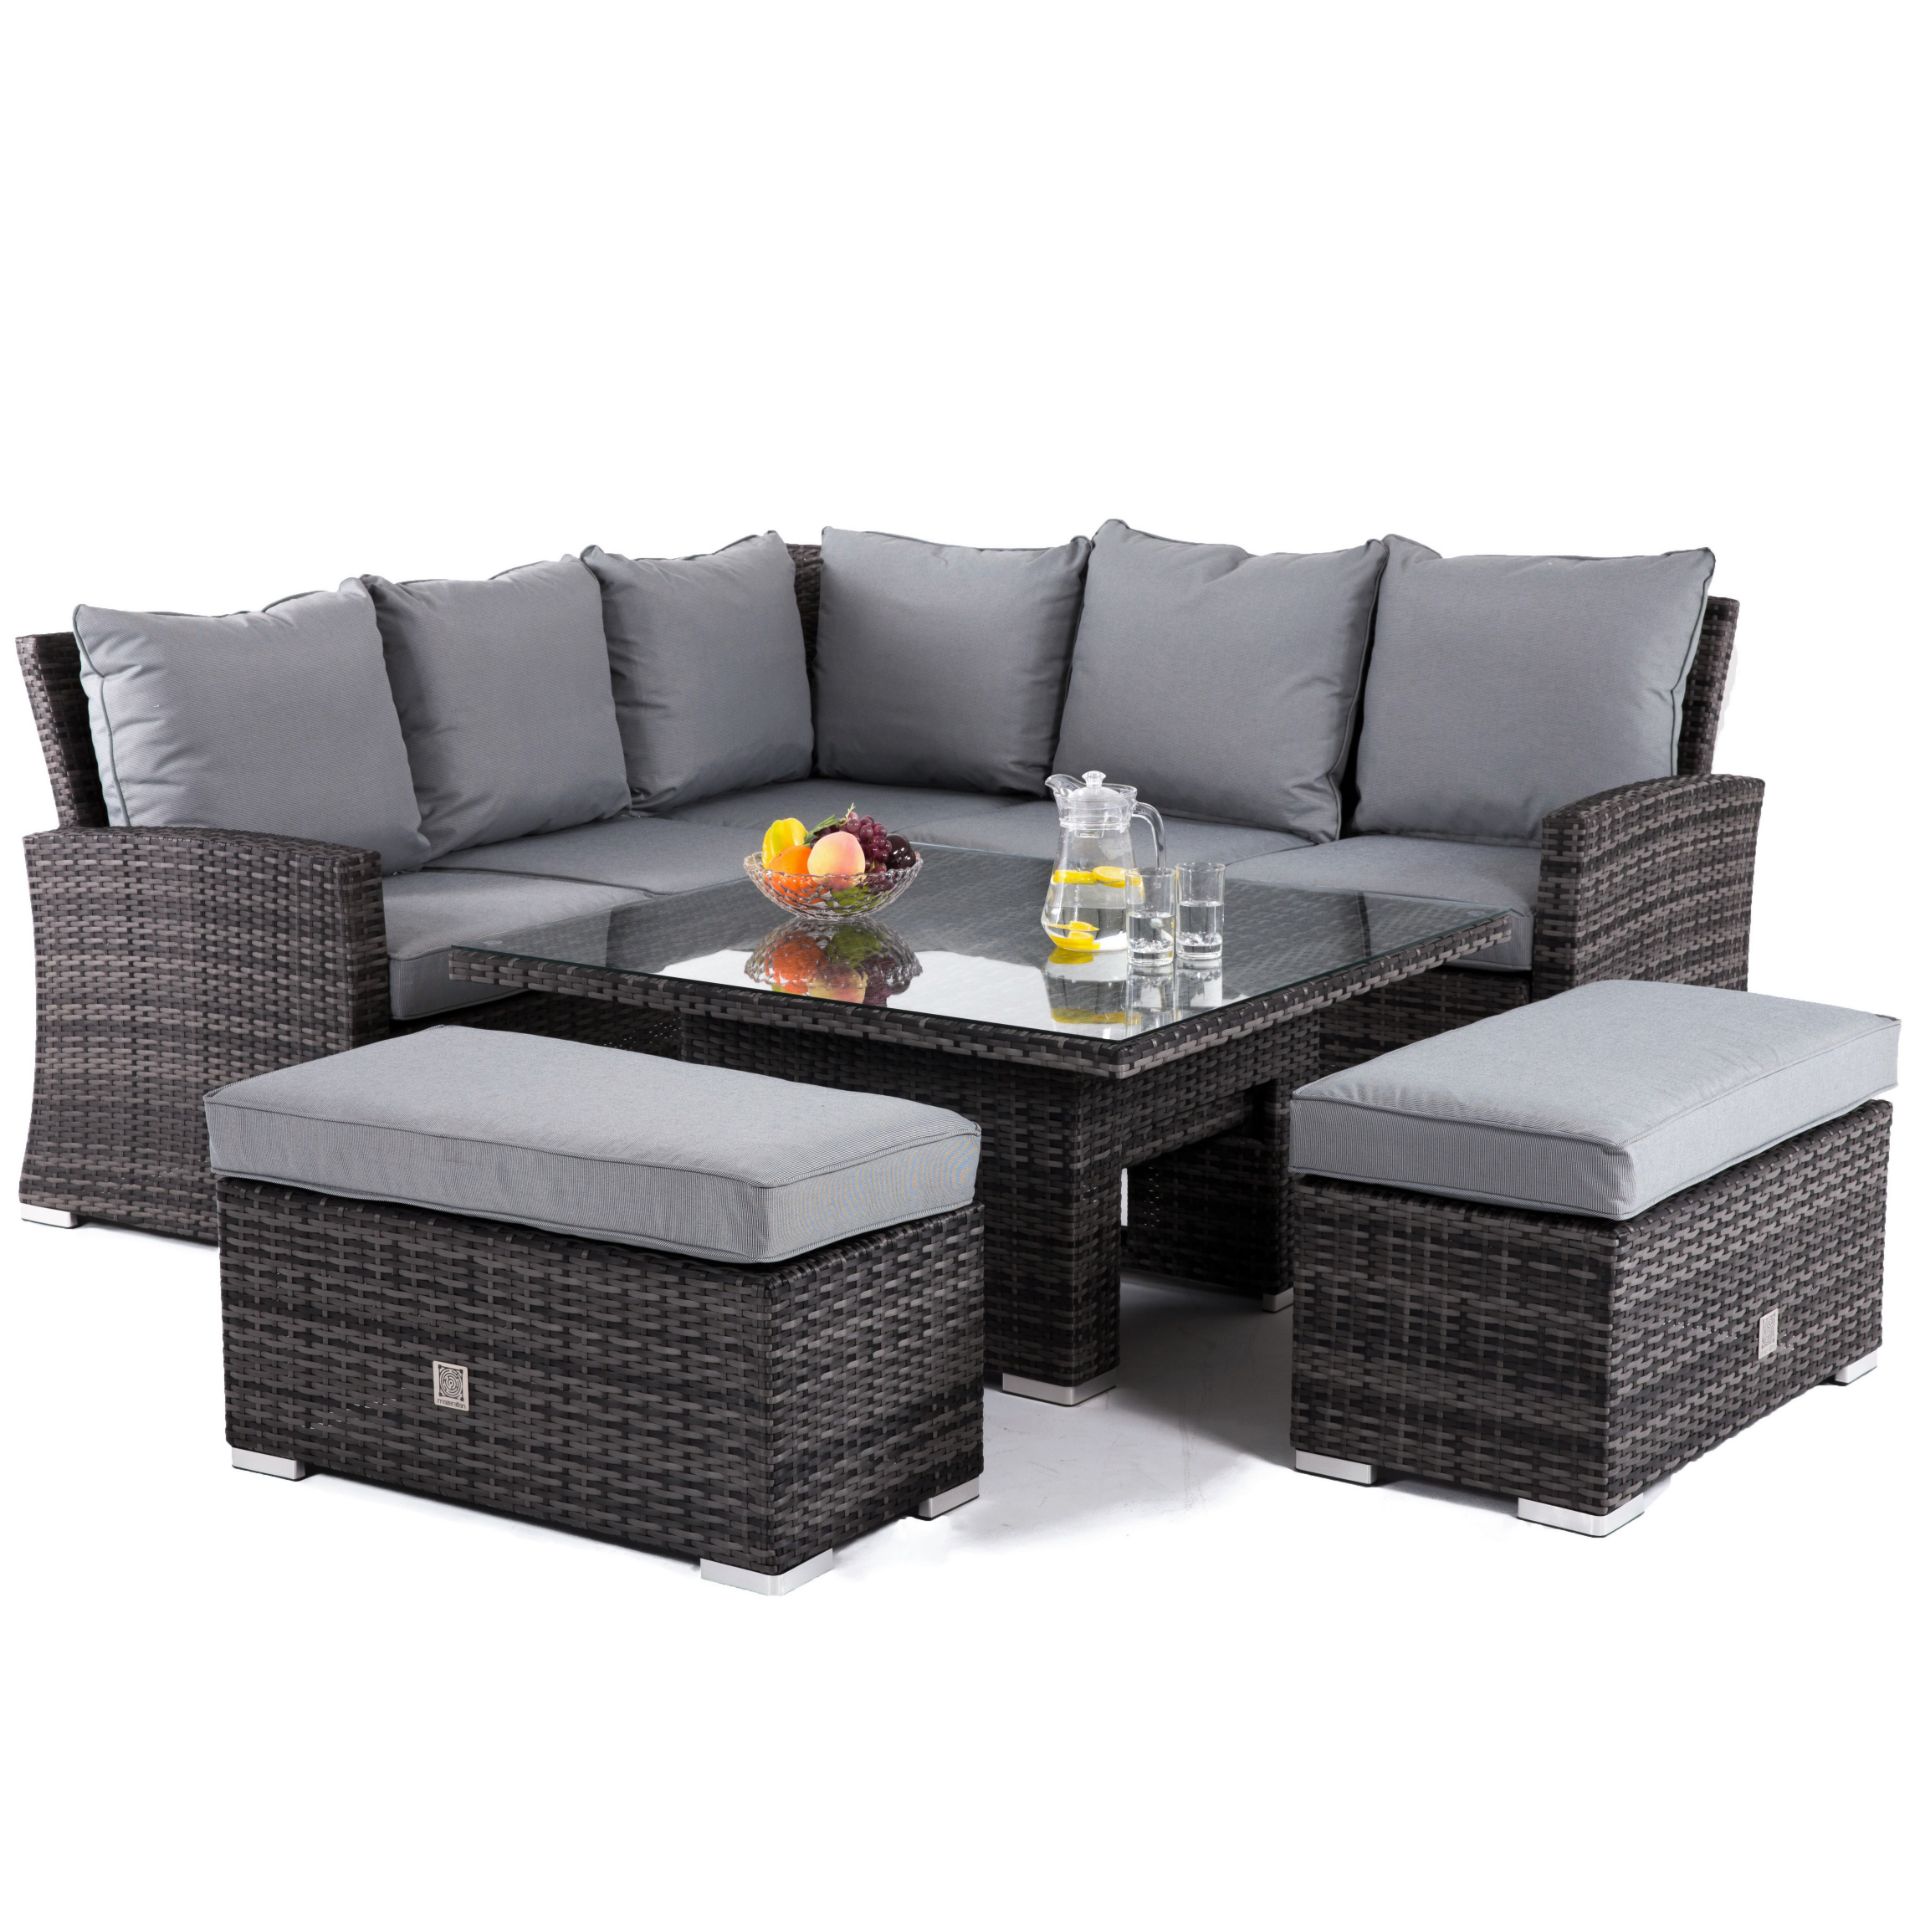 (RESERVE MET) Rattan Richmond Corner Dining Set With Rising Table (Grey) *BRAND NEW* - Image 2 of 3